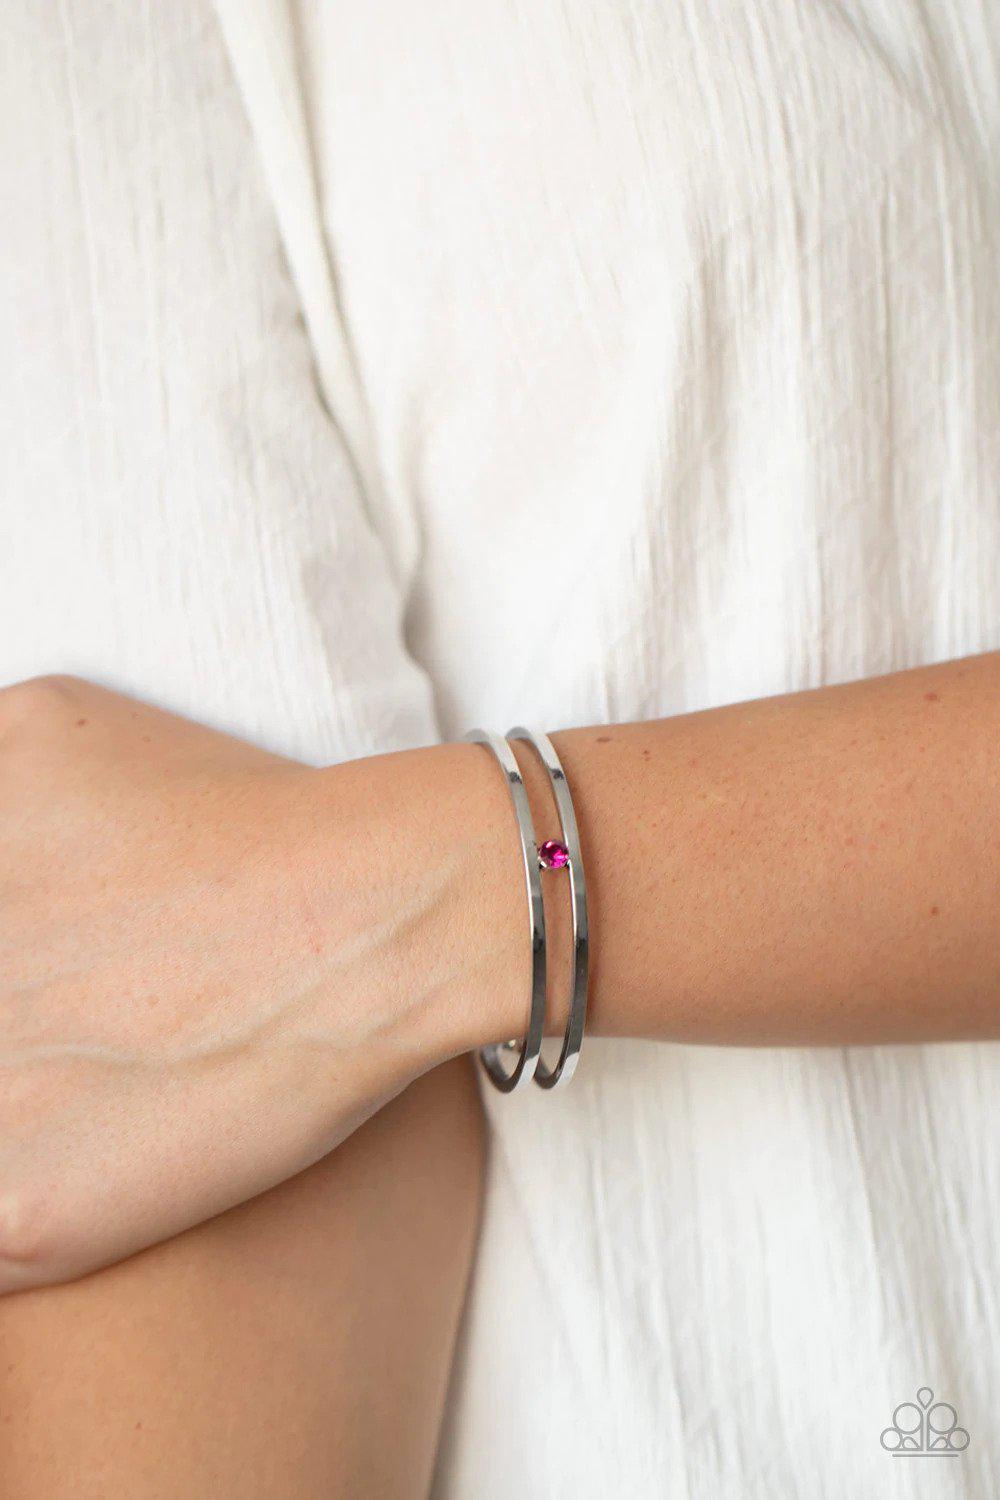 Solo Artist Pink and Silver Cuff Bracelet - Paparazzi Accessories- lightbox - CarasShop.com - $5 Jewelry by Cara Jewels